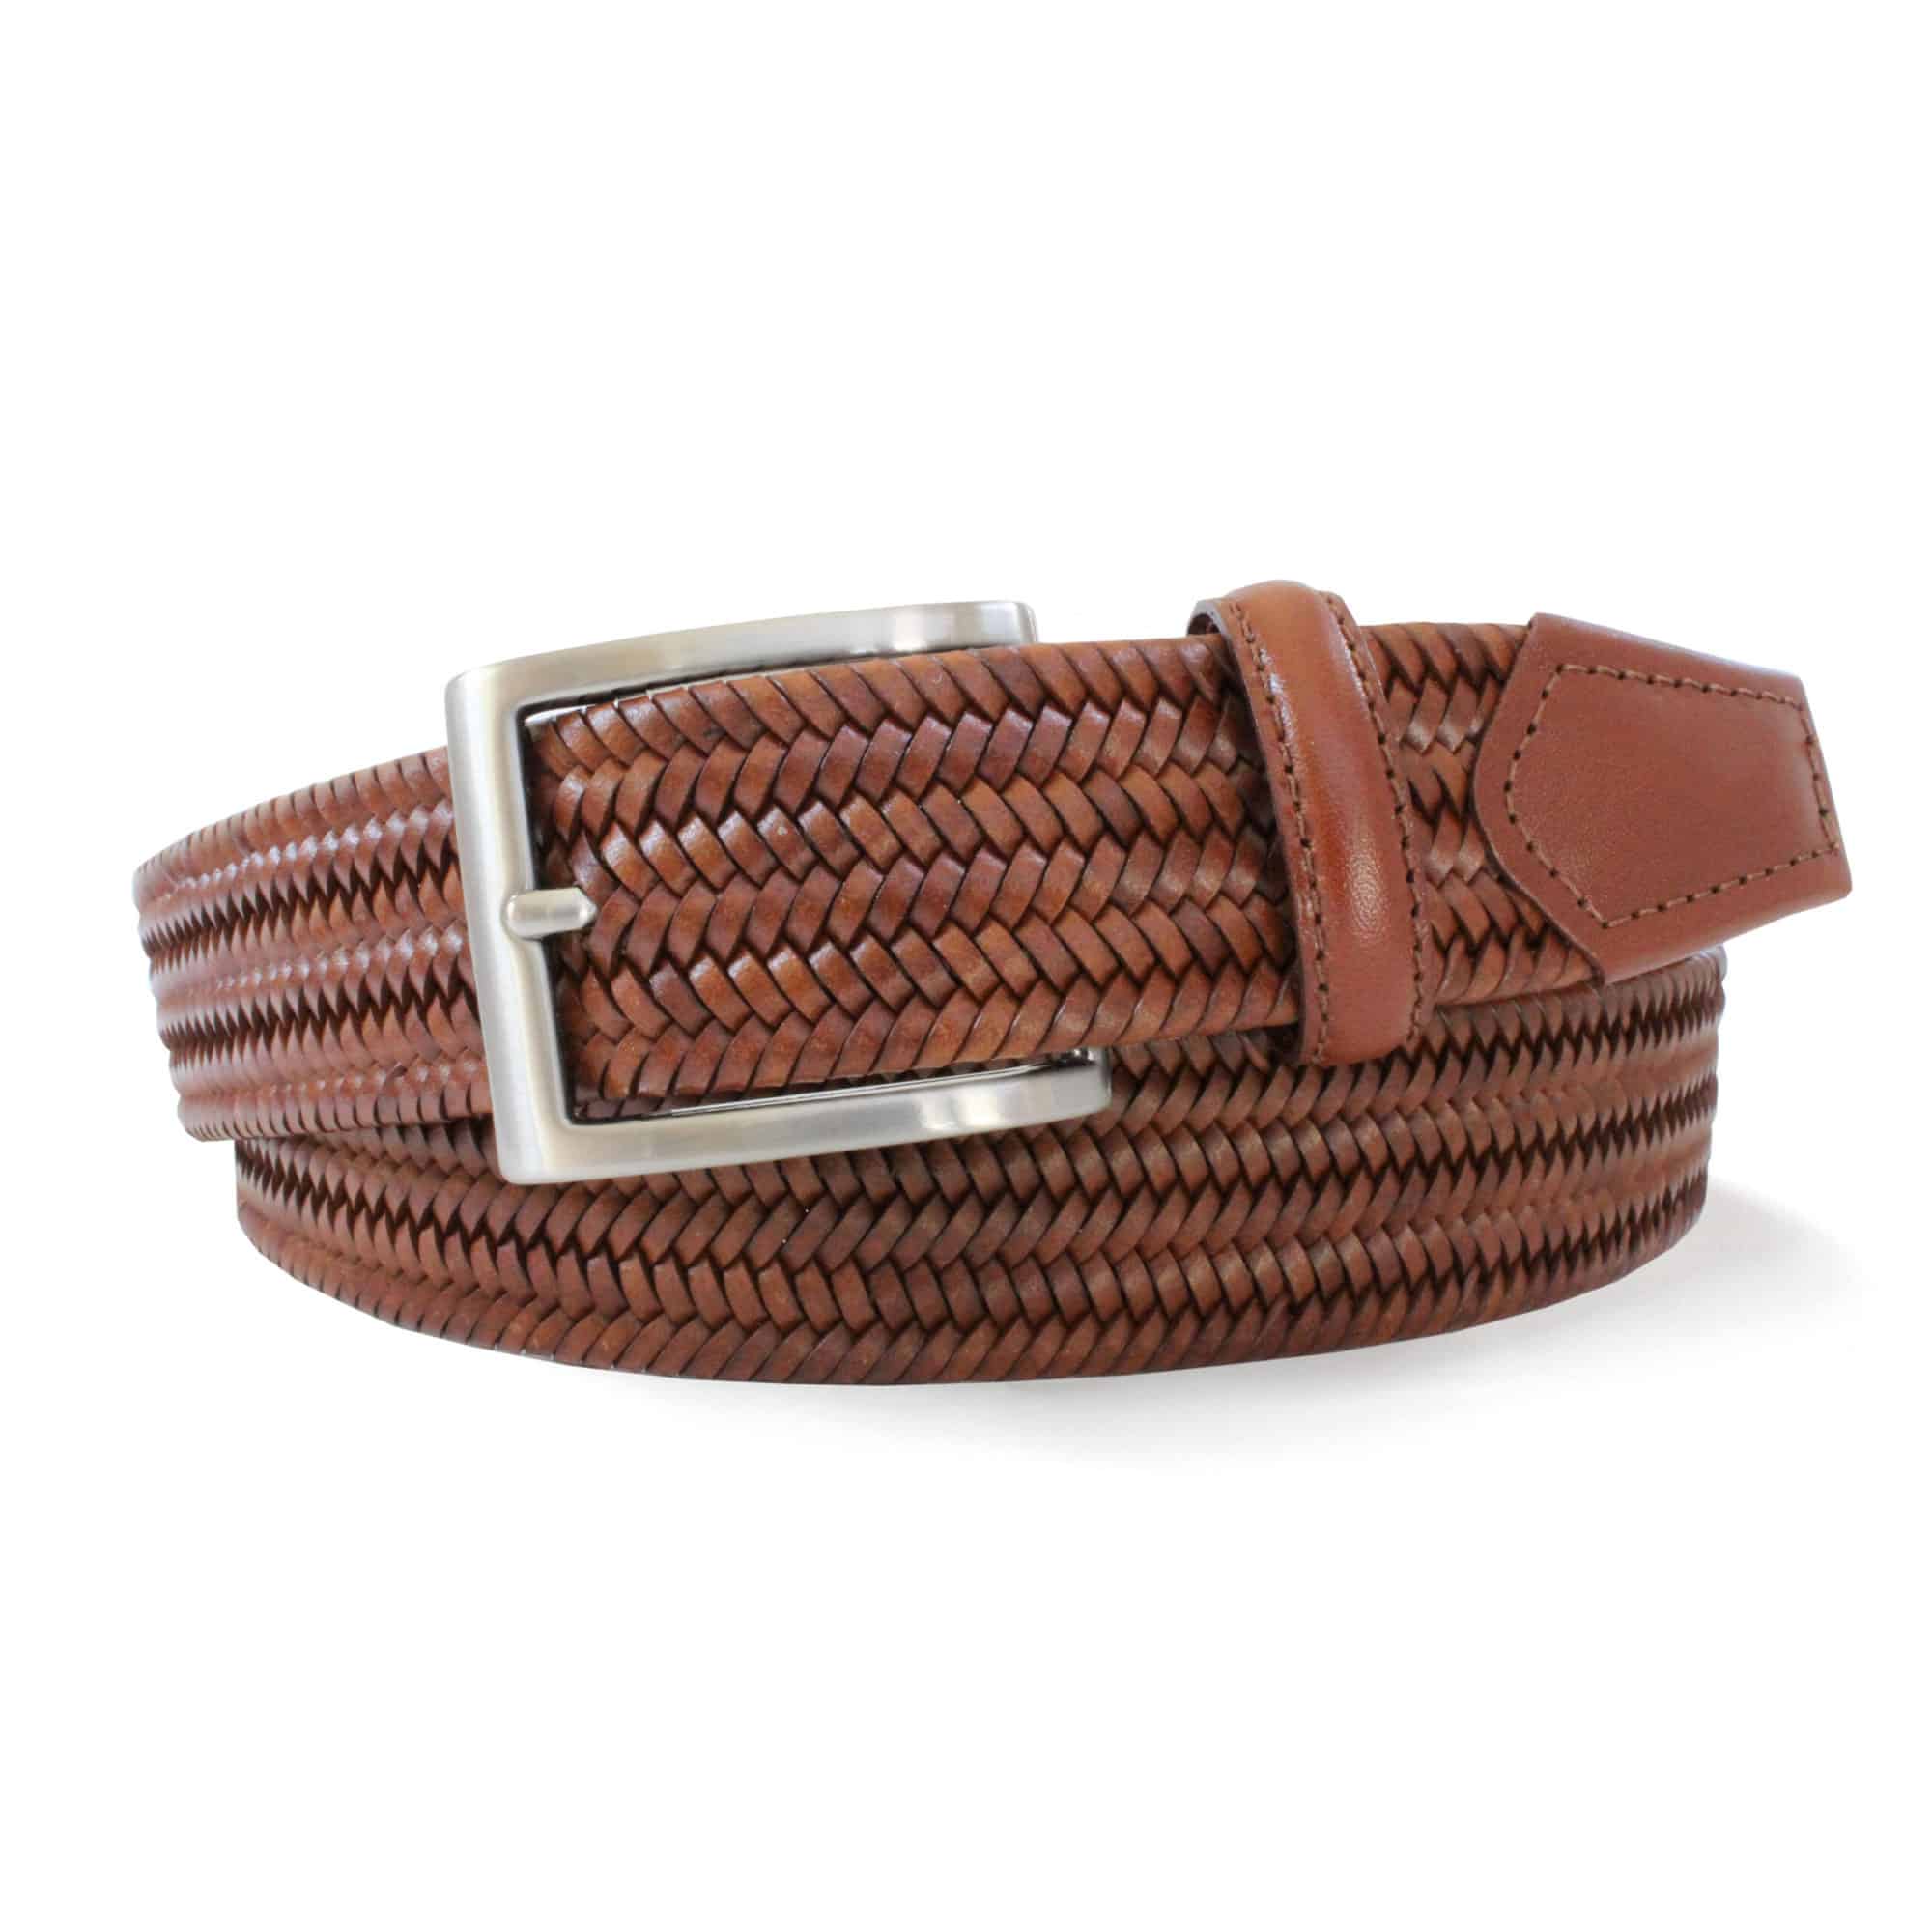 Tan Woven Elastic Belt by Smart Clothes York Yorkshire